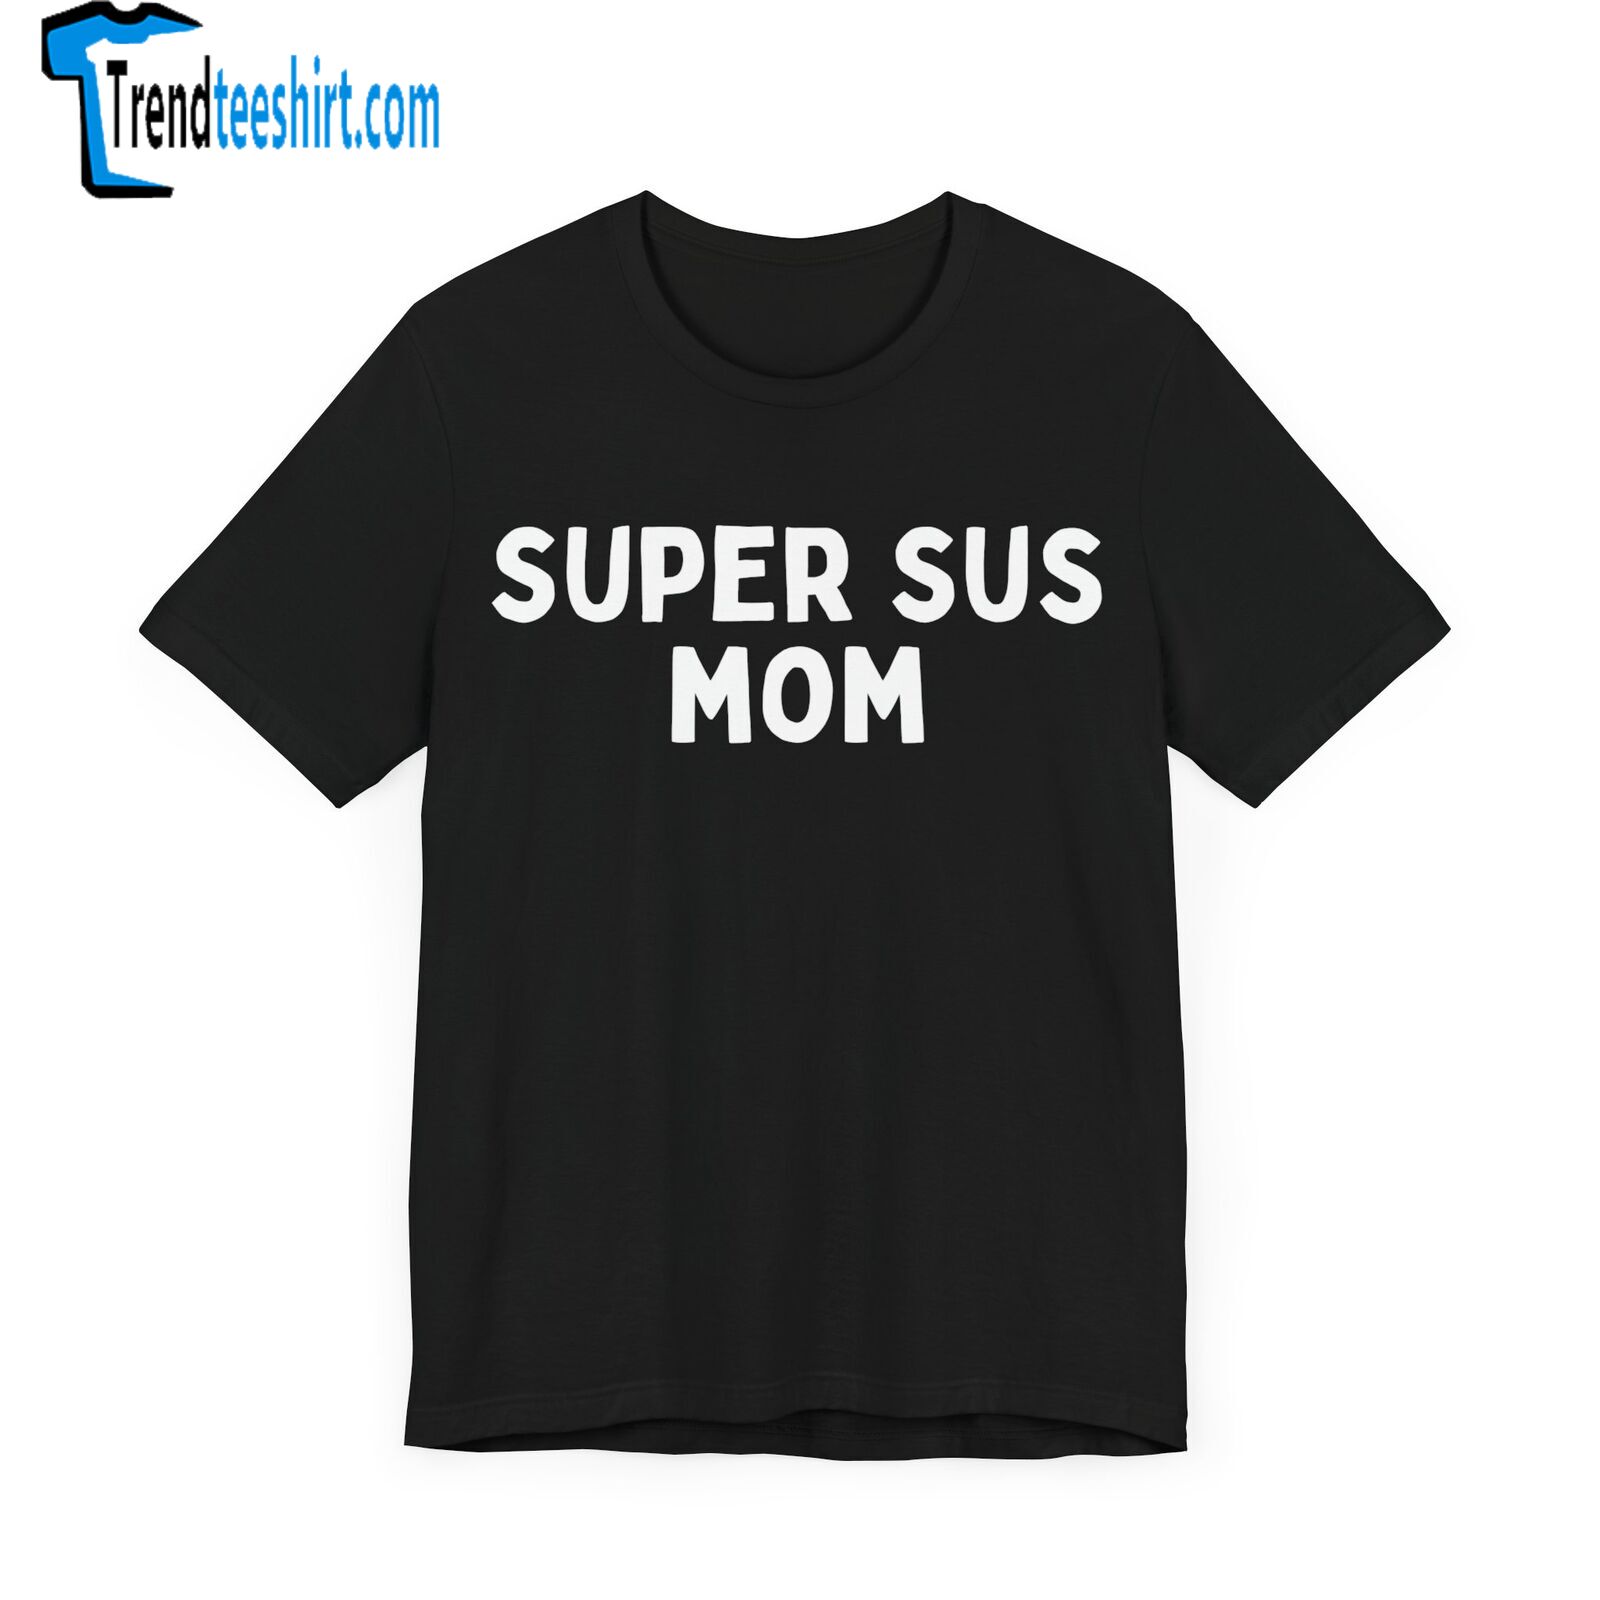 Super Sus Mom Shirt Playful Tee - Mother's Day Gift Birthday Gift Christmas Gift